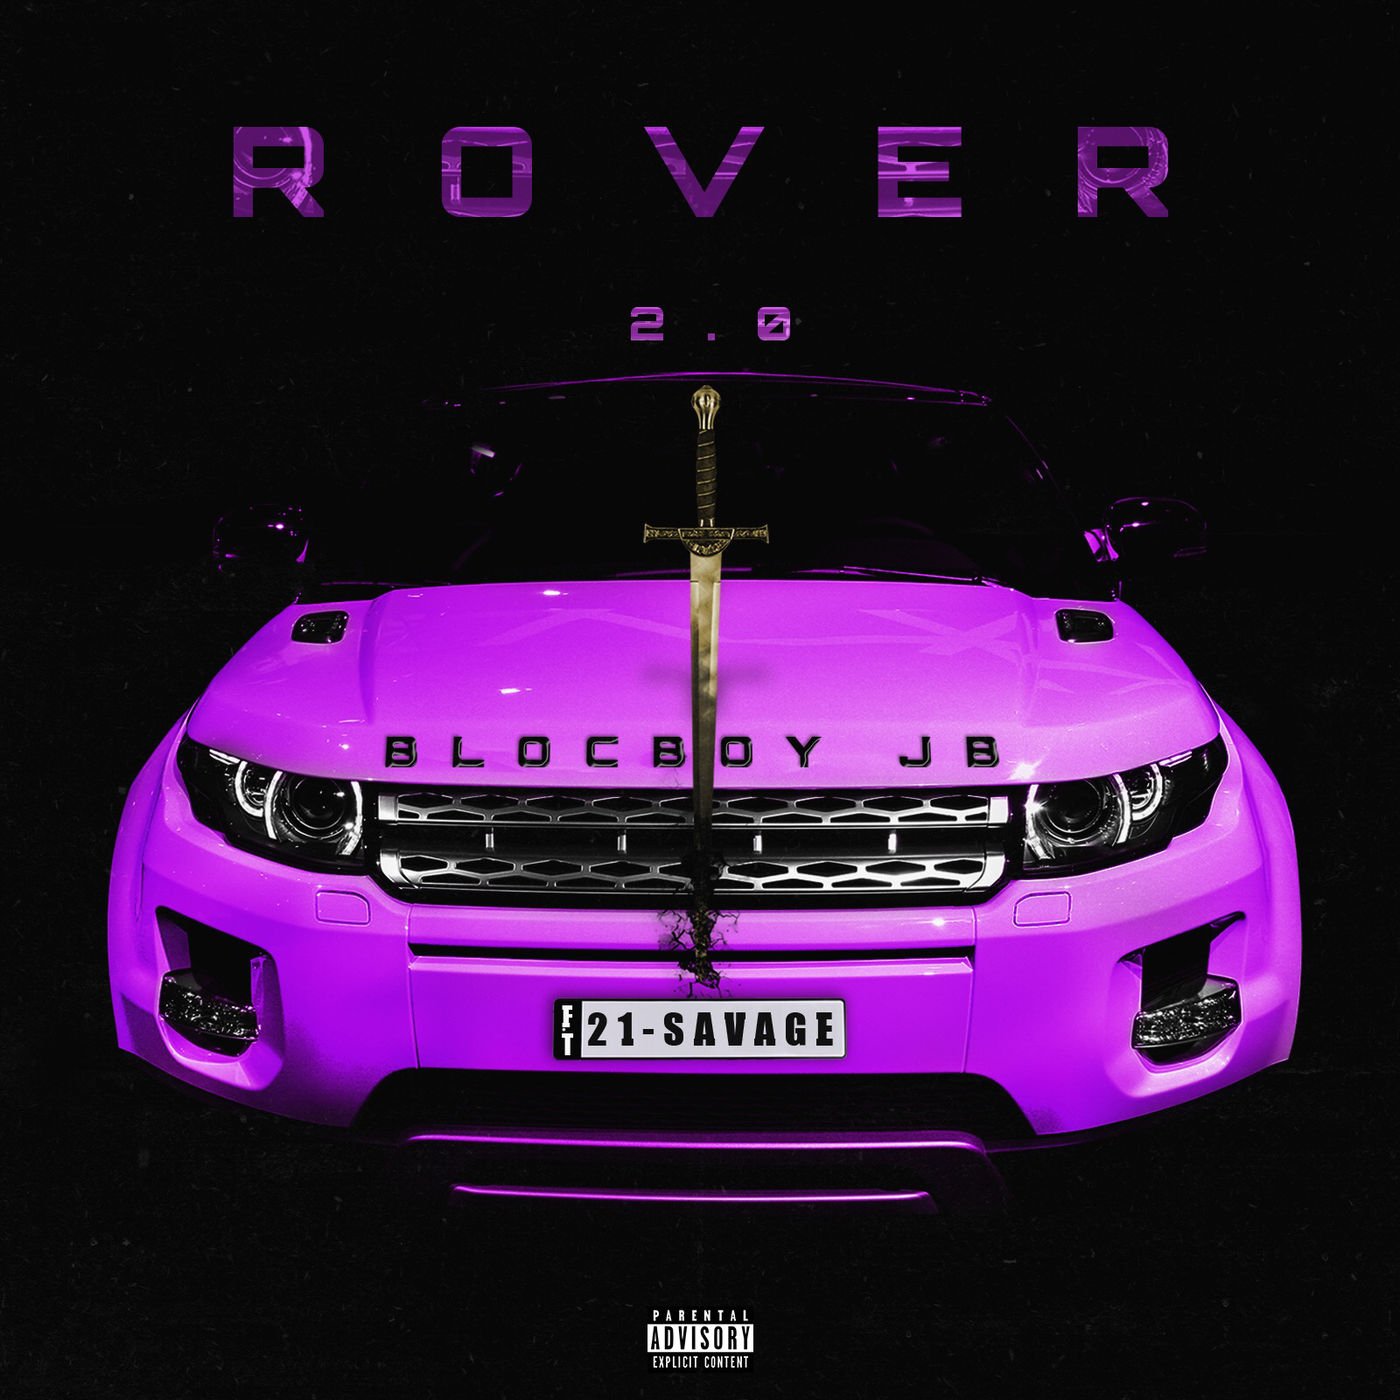 New Video: BlocBoy JB – 'Rover 2.0' (Feat. 21 Savage) | HipHop-N-More